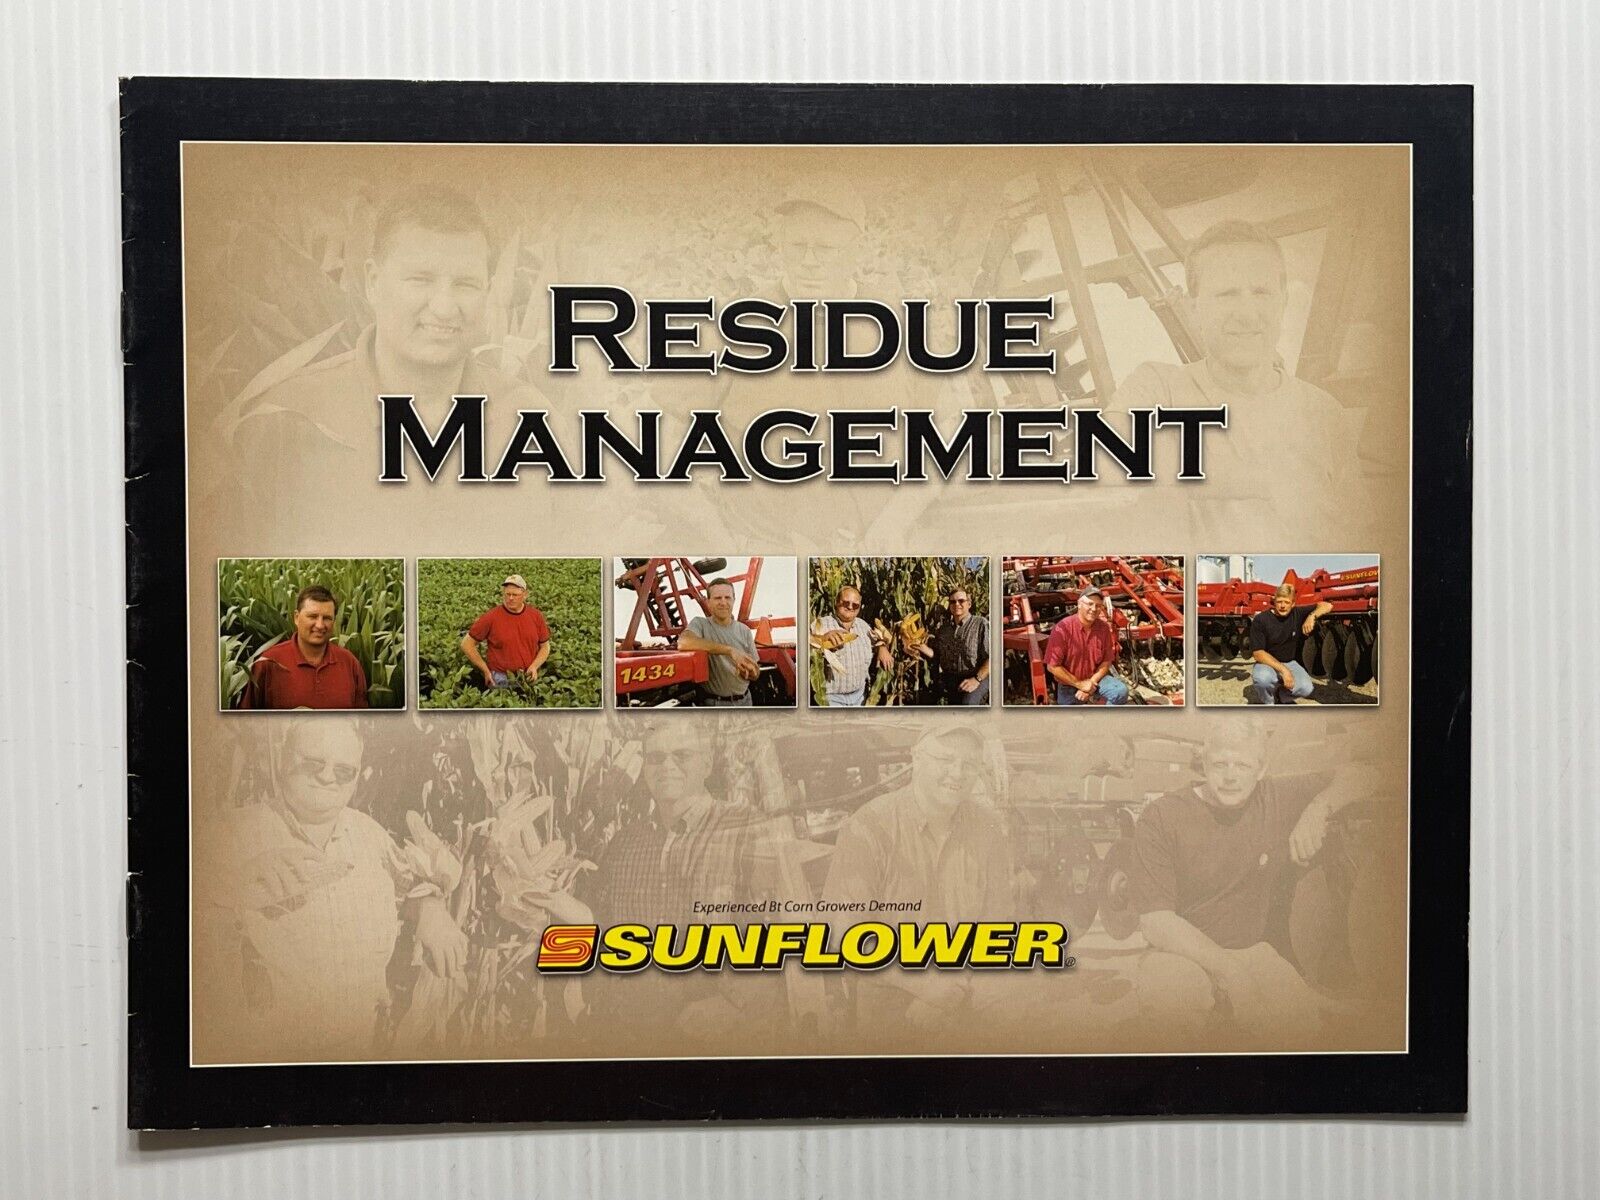 Sunflower Residue Management Systems Sales Brochure *Original Dated 2005*